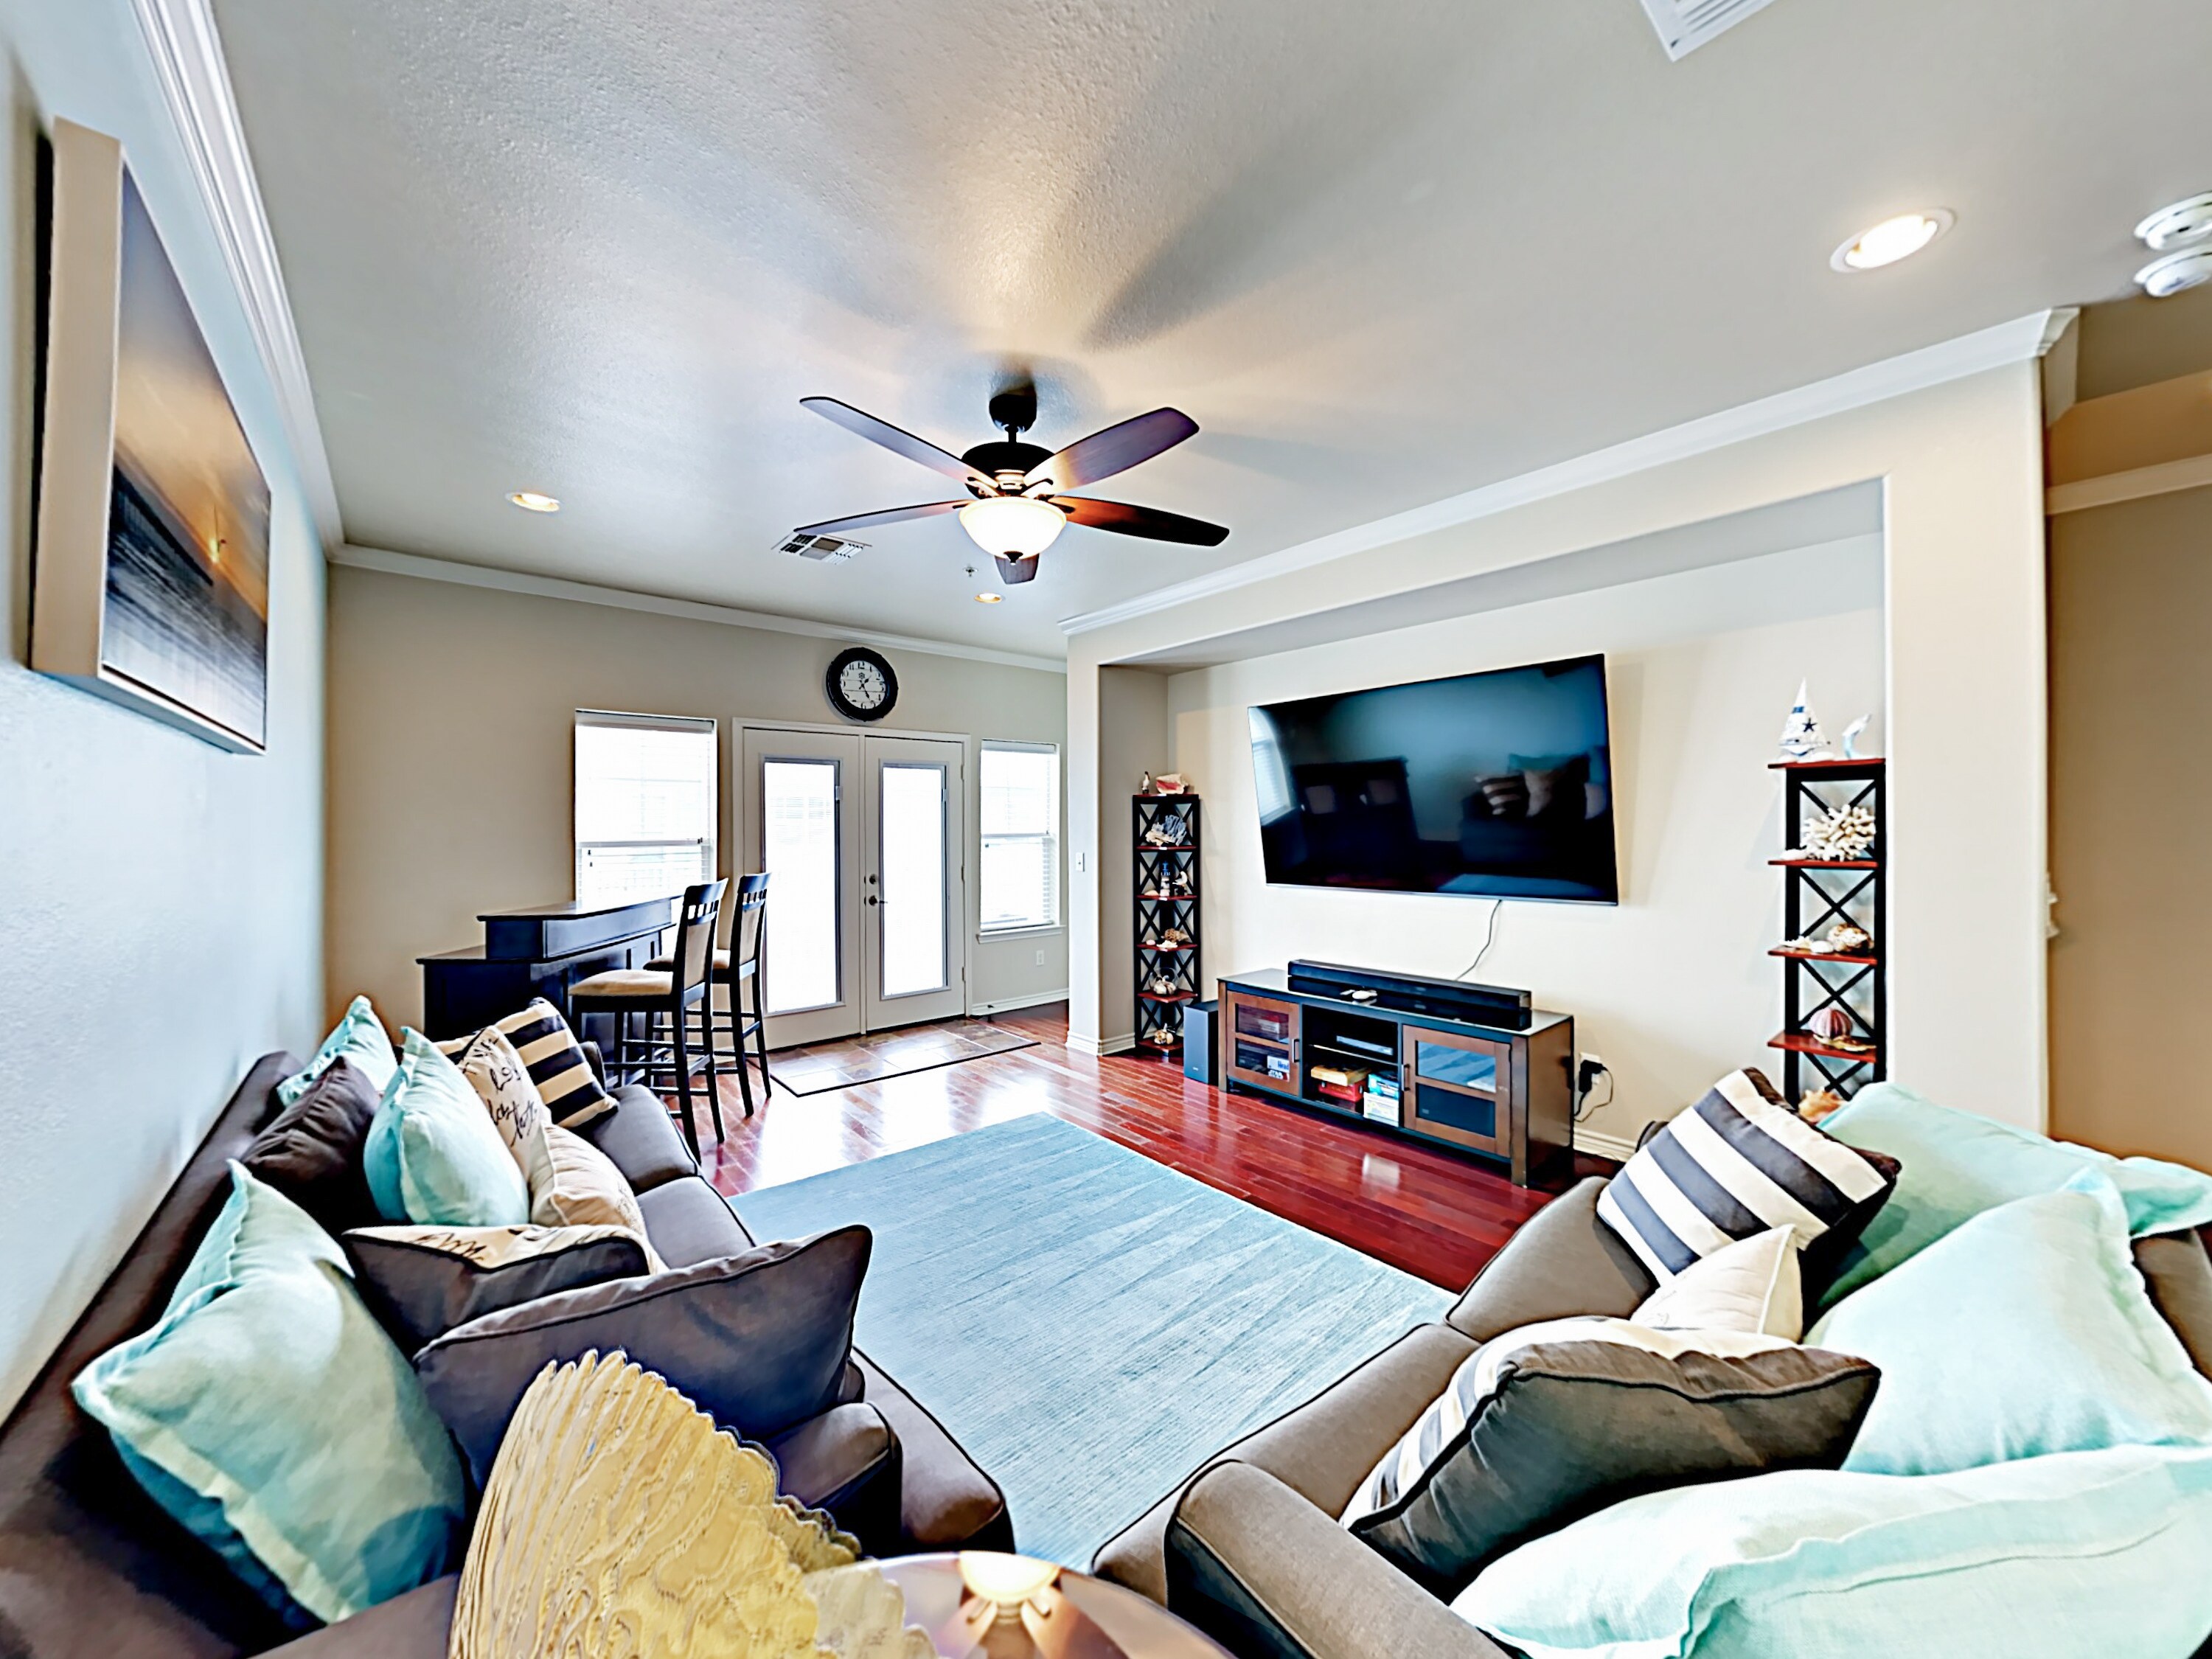 Welcome to Port Aransas! This condo is professionally managed by TurnKey Vacation Rentals.